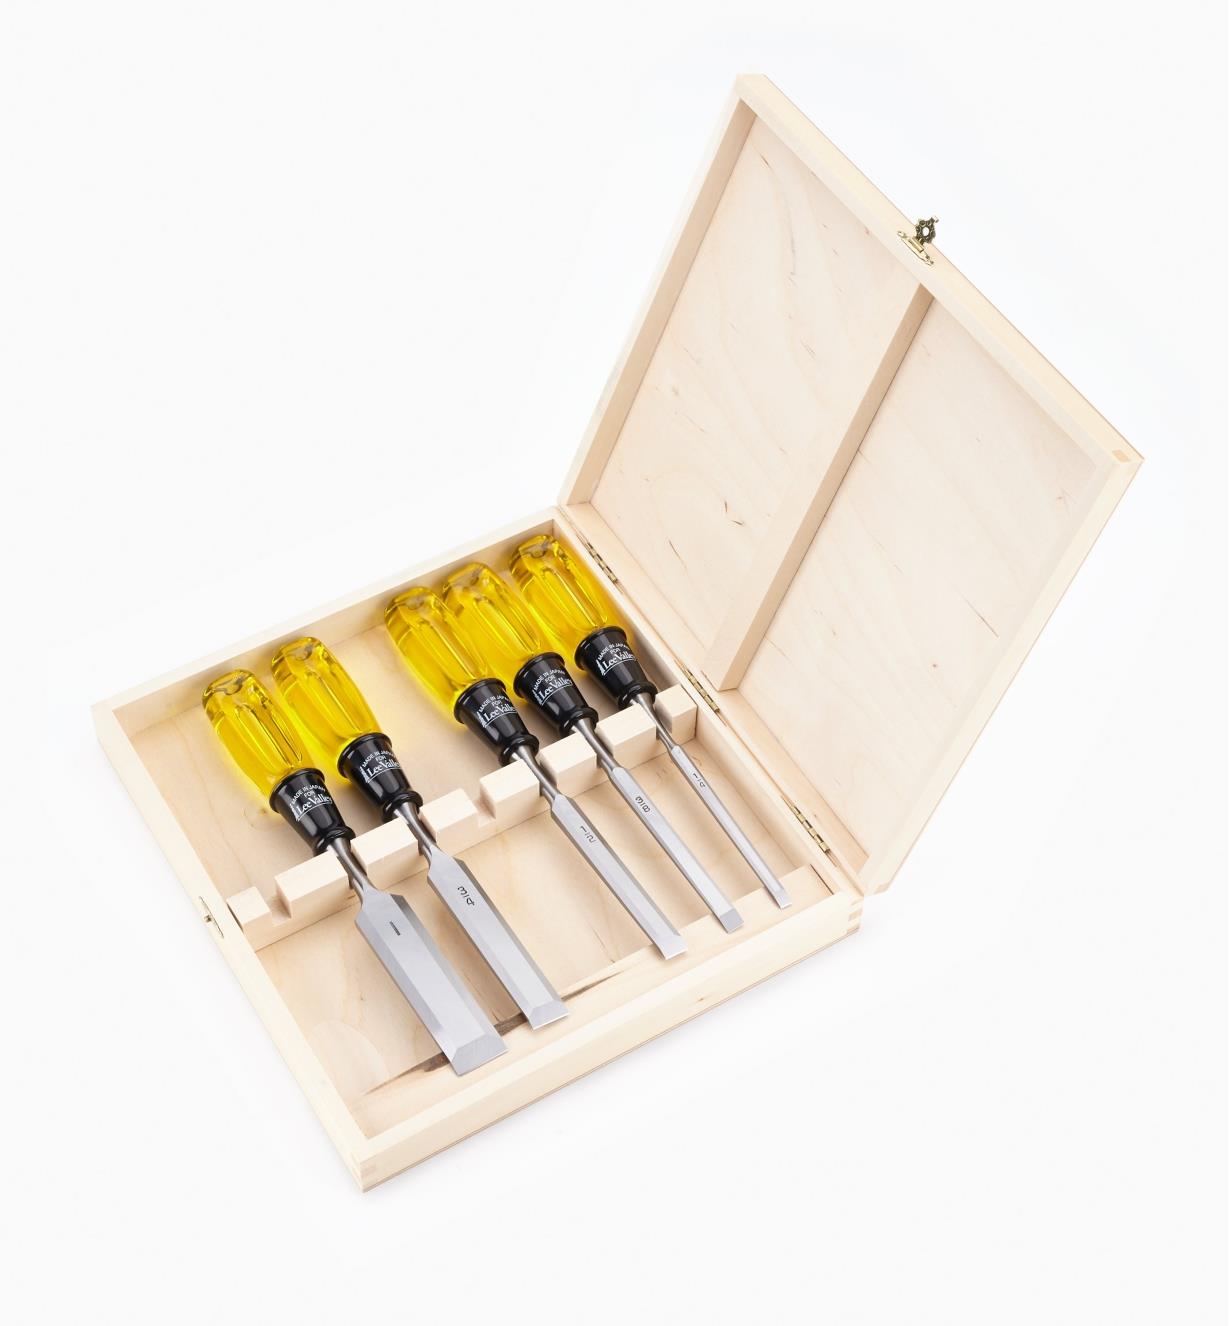 44S0122 - Boxed Set of 5 Bevel-Edge Chisels (1/4" to 1")